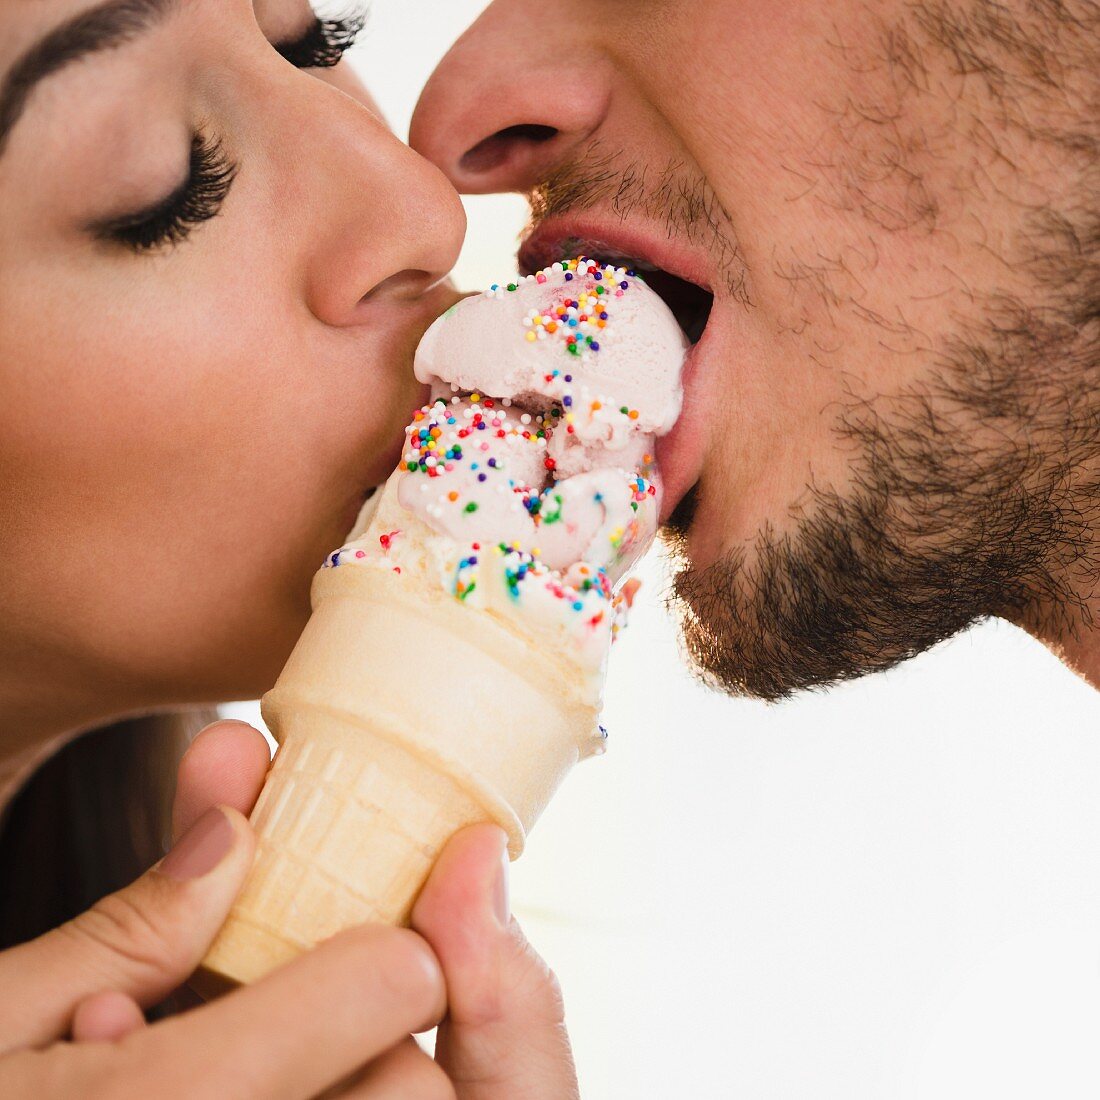 Couple eating ice cream together